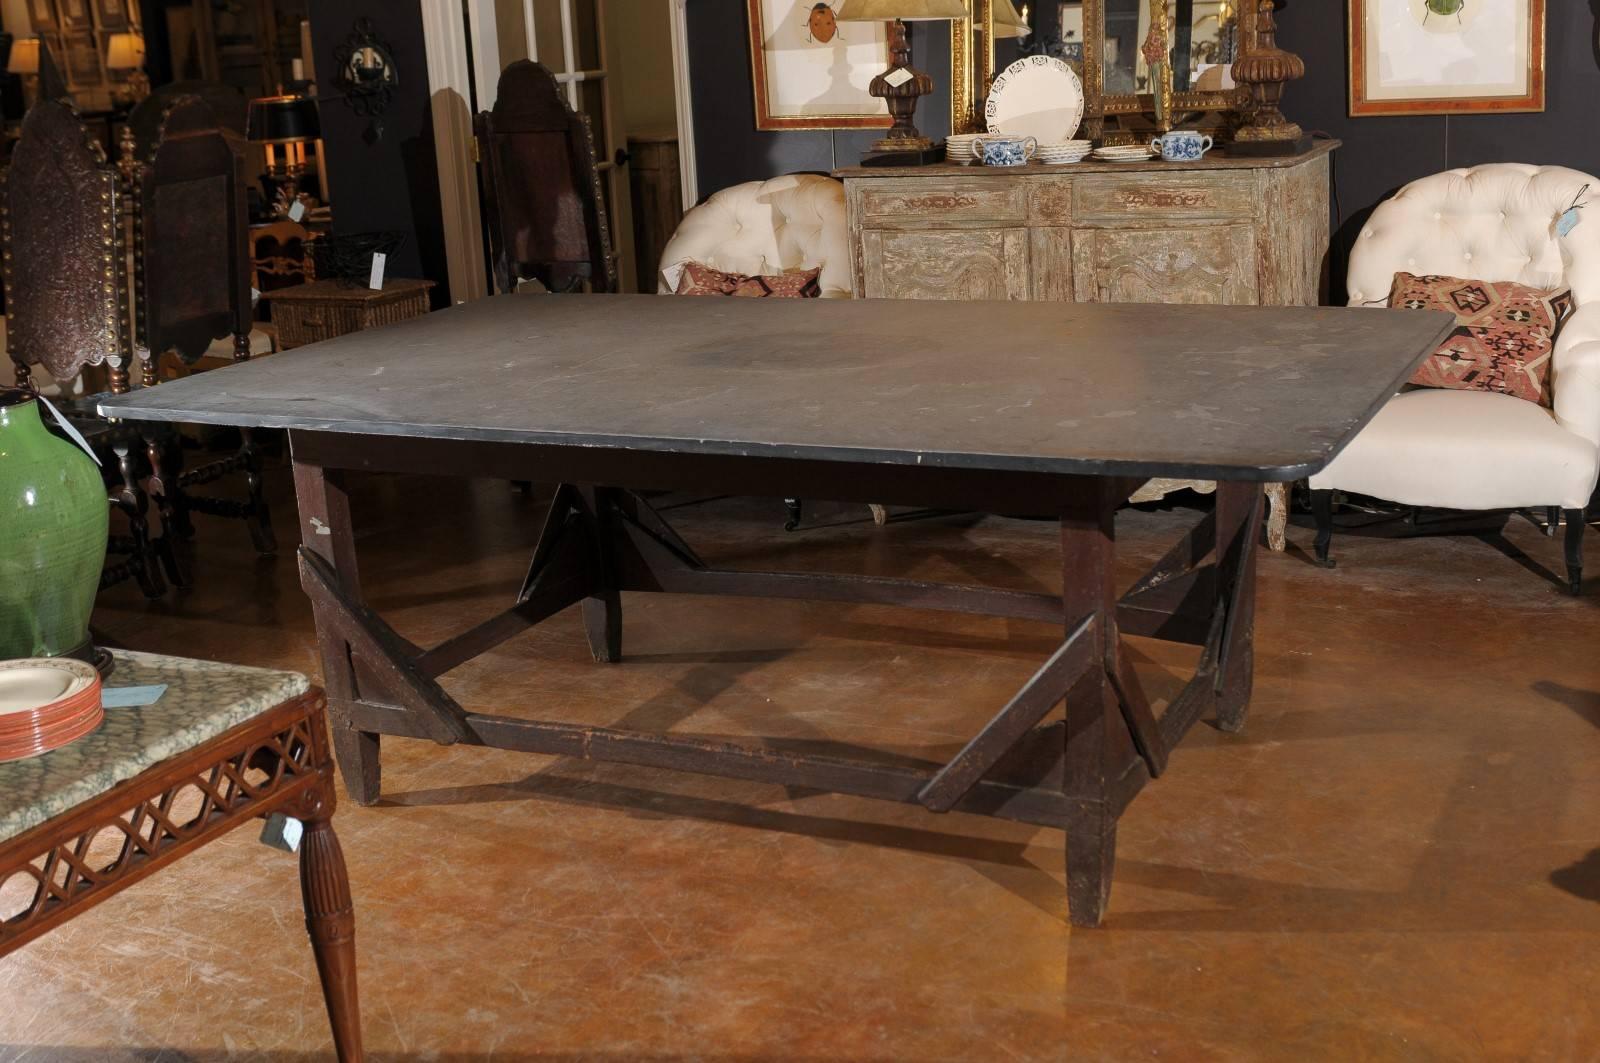 Stone Italian Rustic Work Table with Bluestone Top and Stretchered Wooden Base